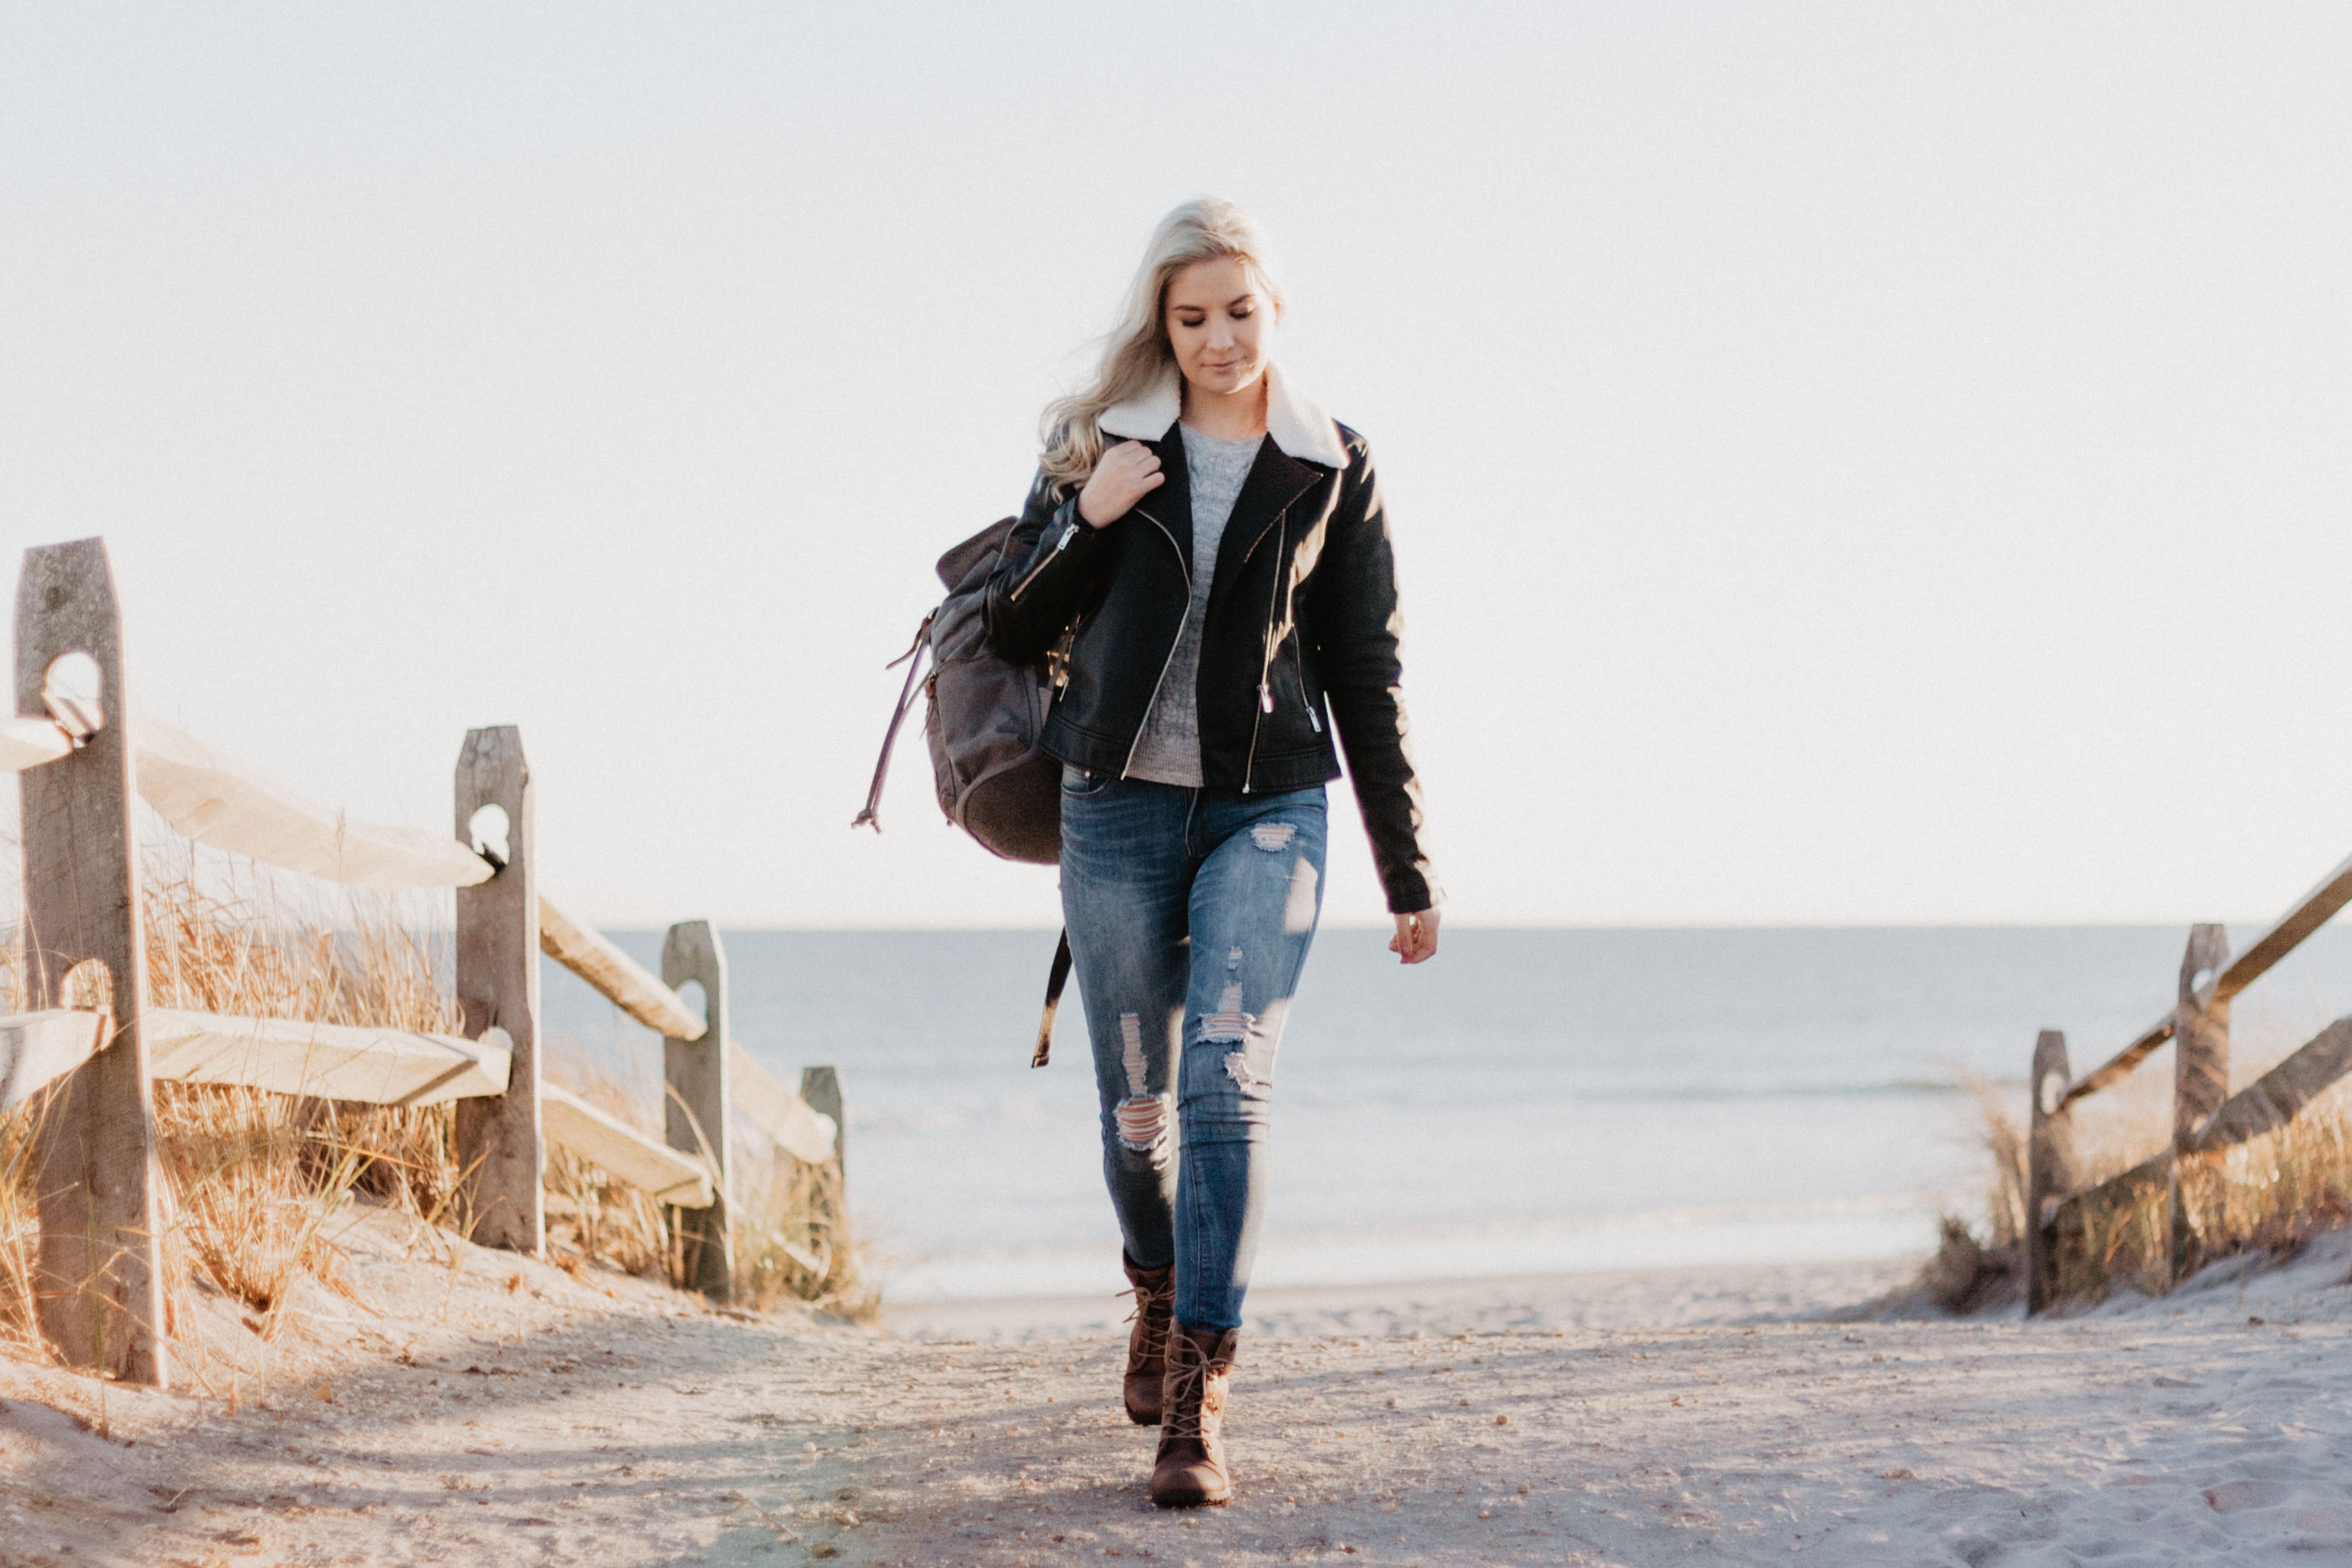 Woman walking off the beach in a black leather jacket